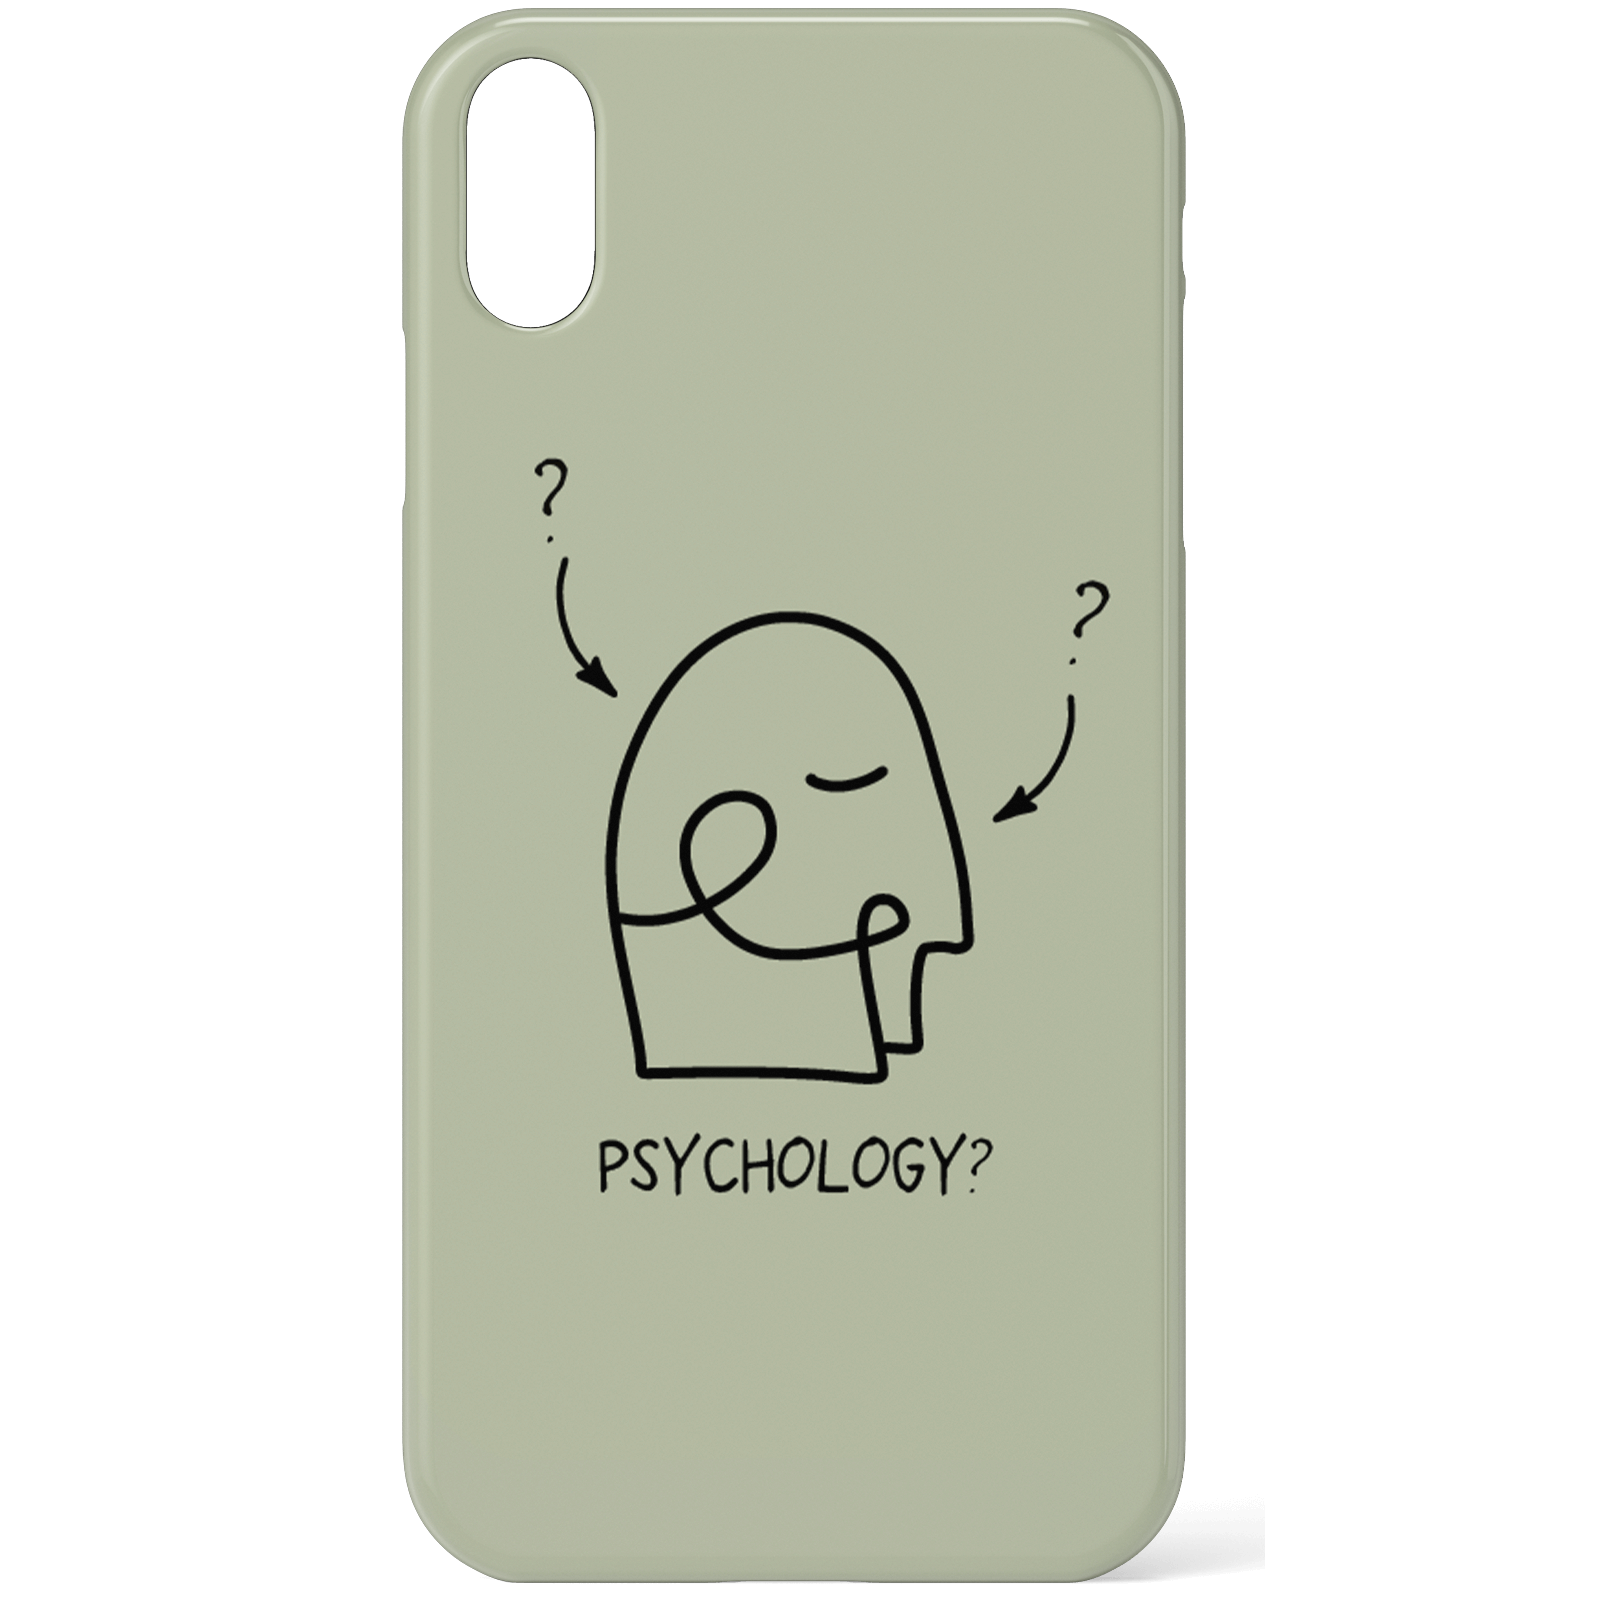 Psychology Illustration Phone Case for iPhone and Android - iPhone 5/5s - Snap Case - Matte